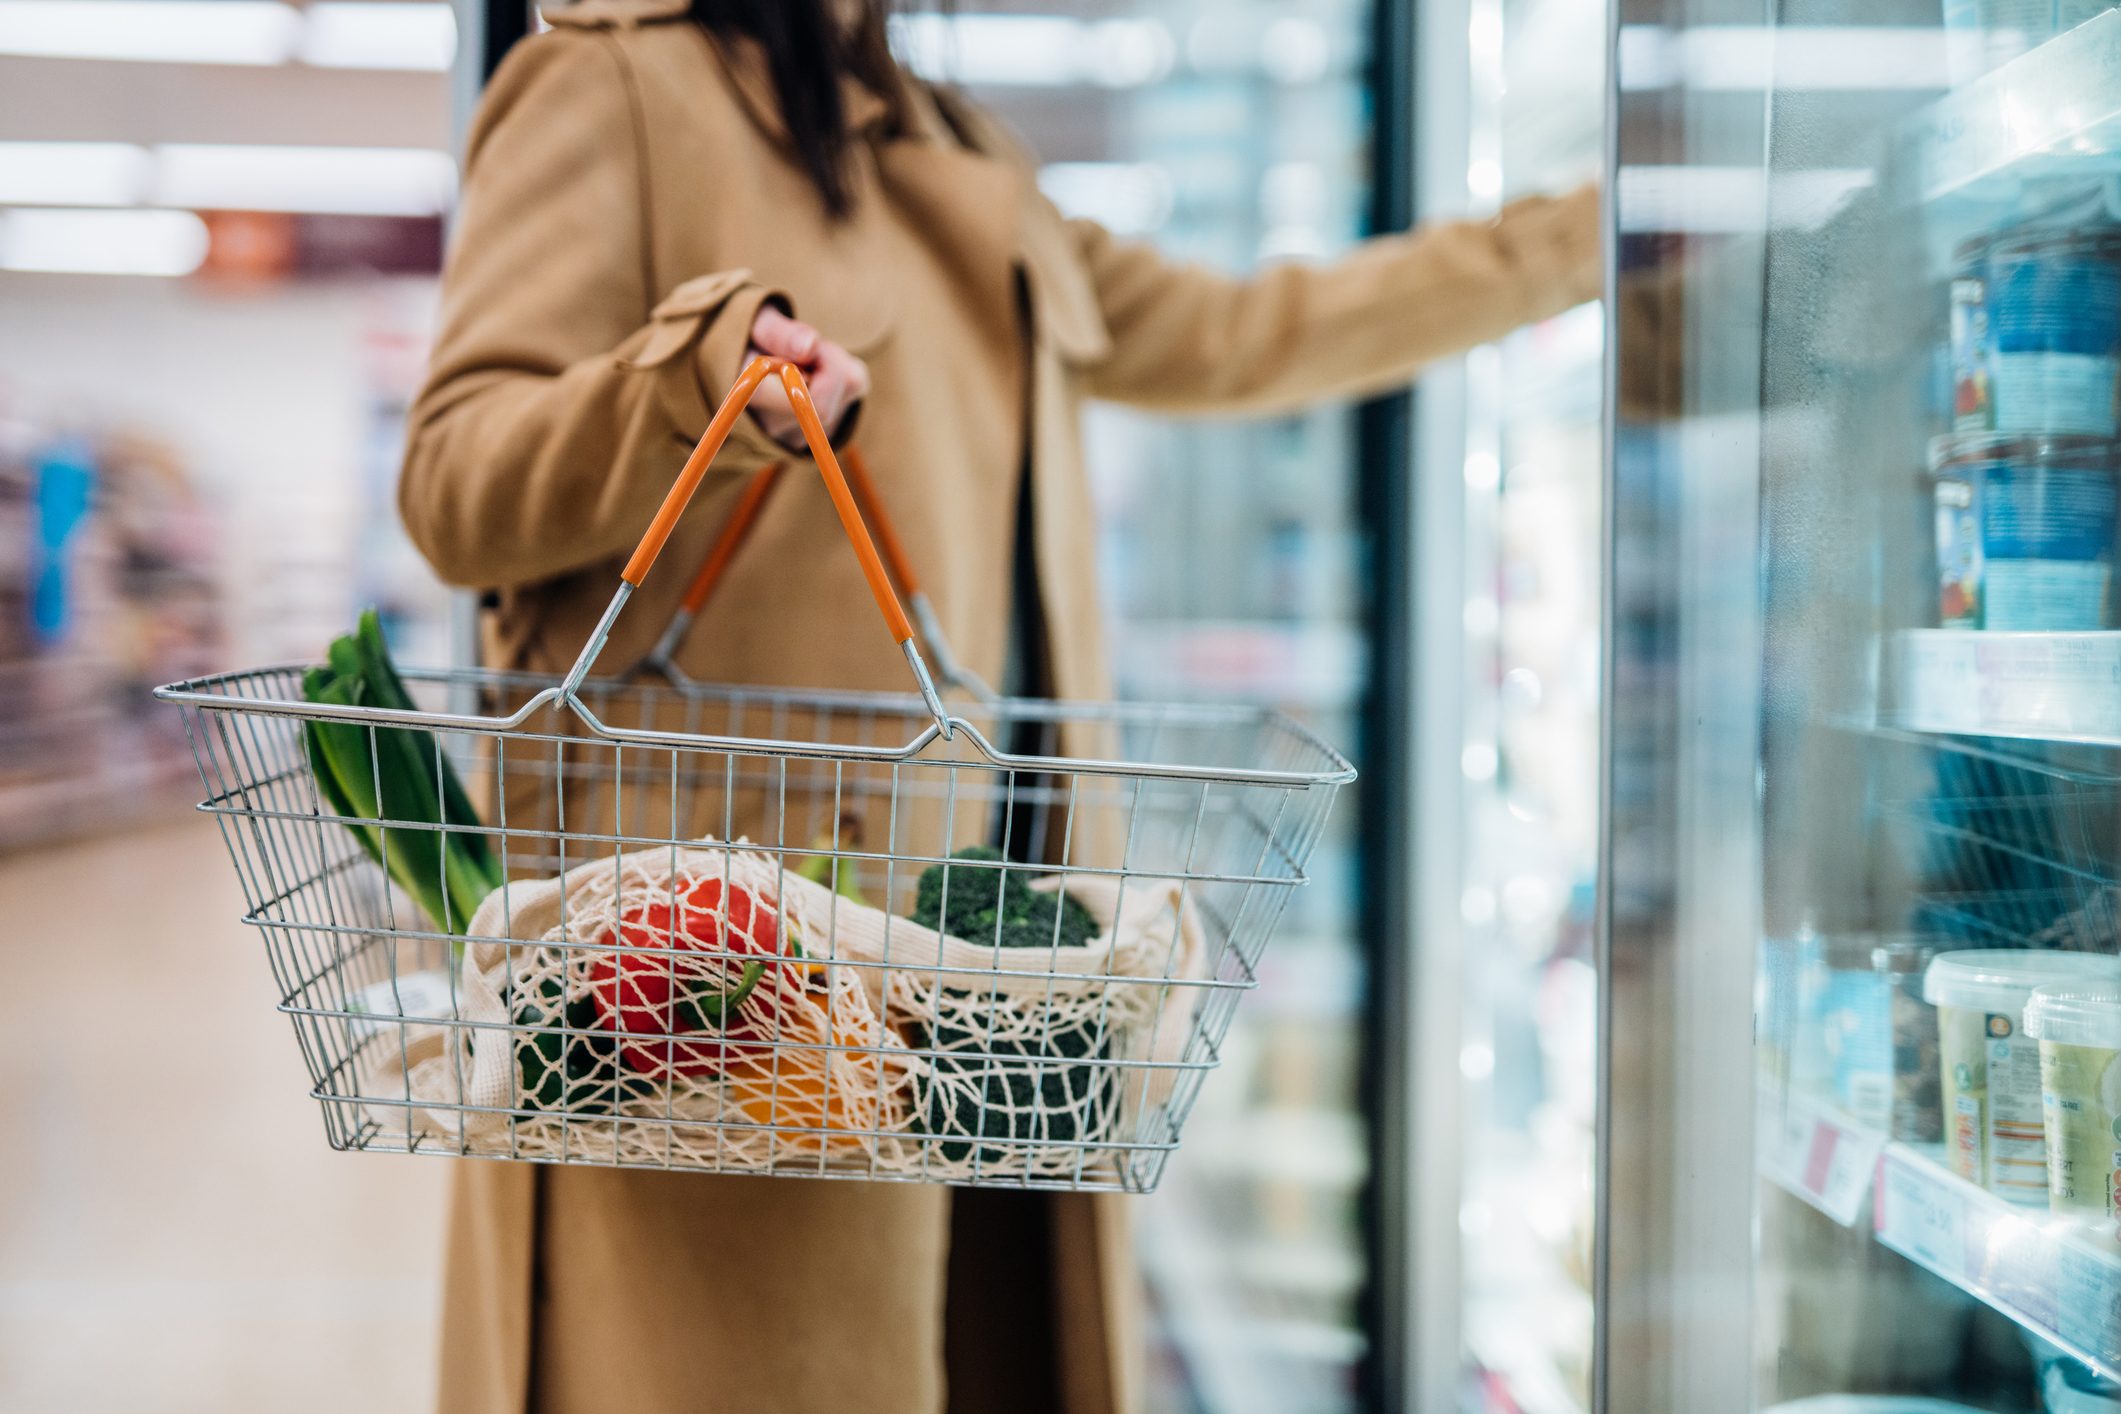 15 Secret Grocery Shopping Tips You Need to Know